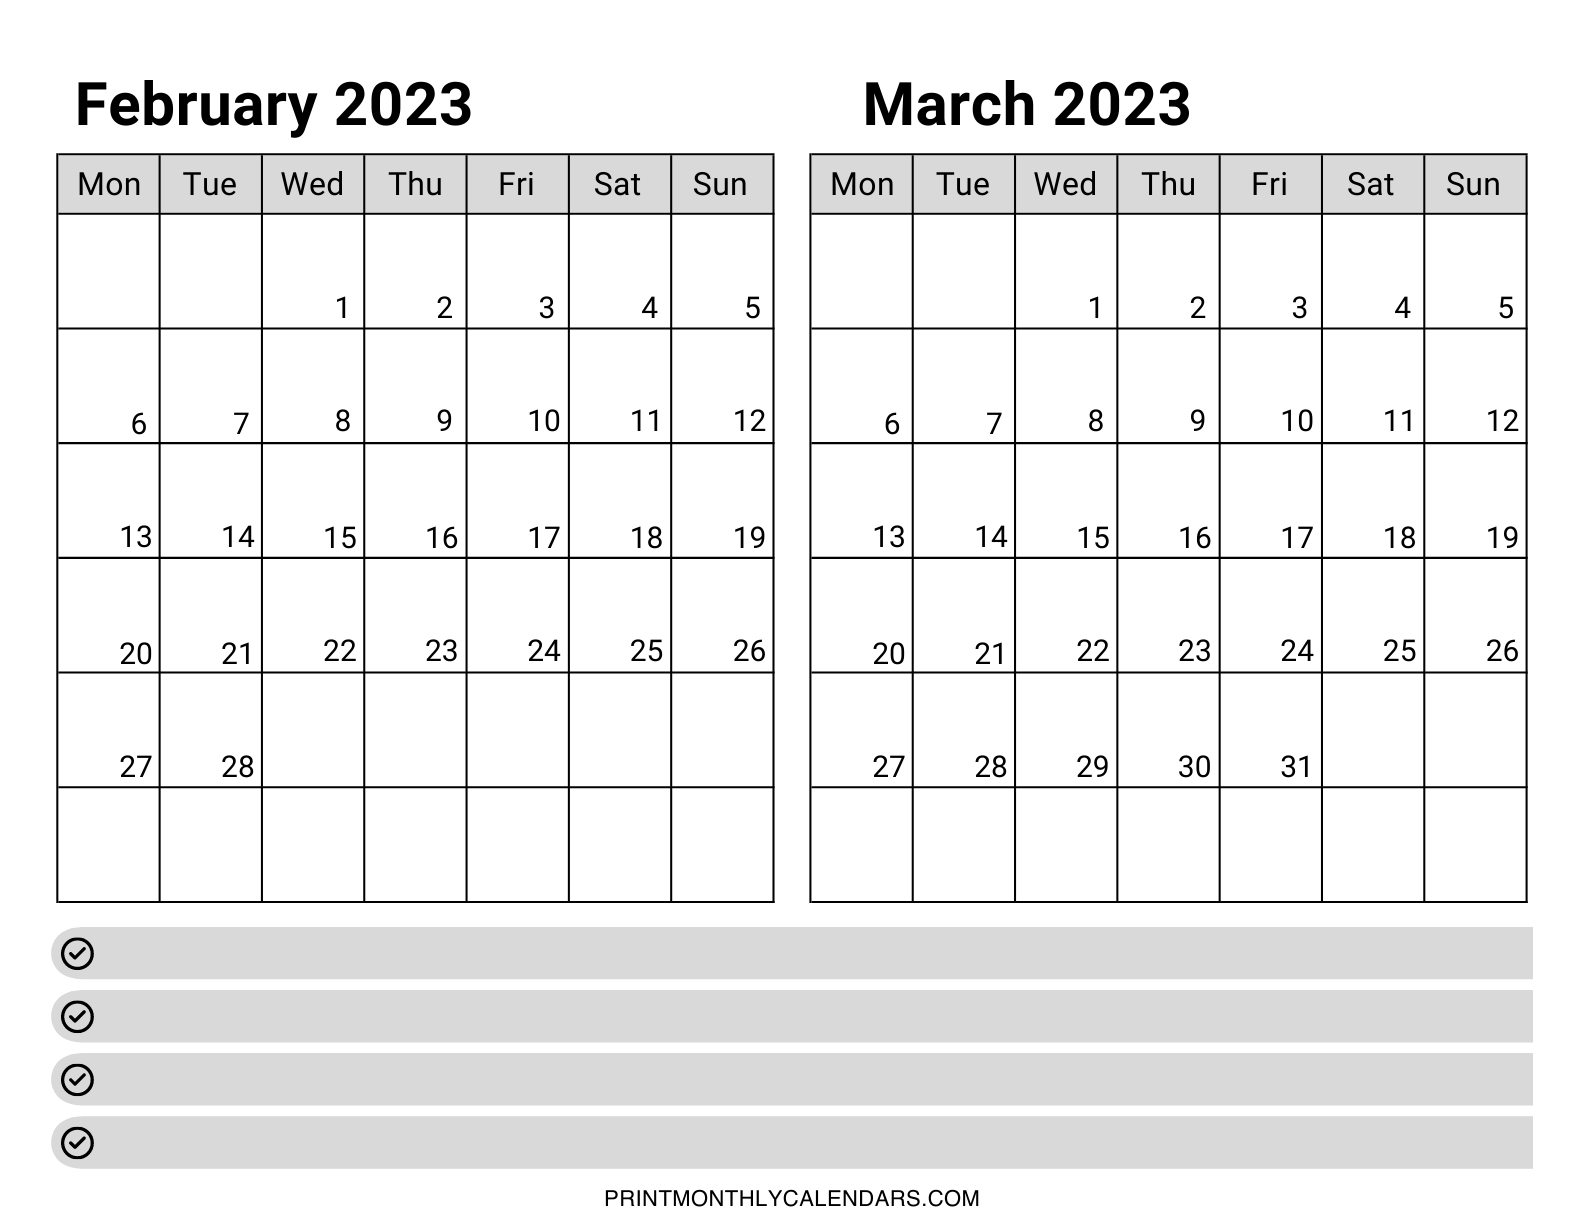 February March 2023 Calendar with blank notes section to write down important days, dates, events, schedules and meetings. Weekdays are starting from Monday.